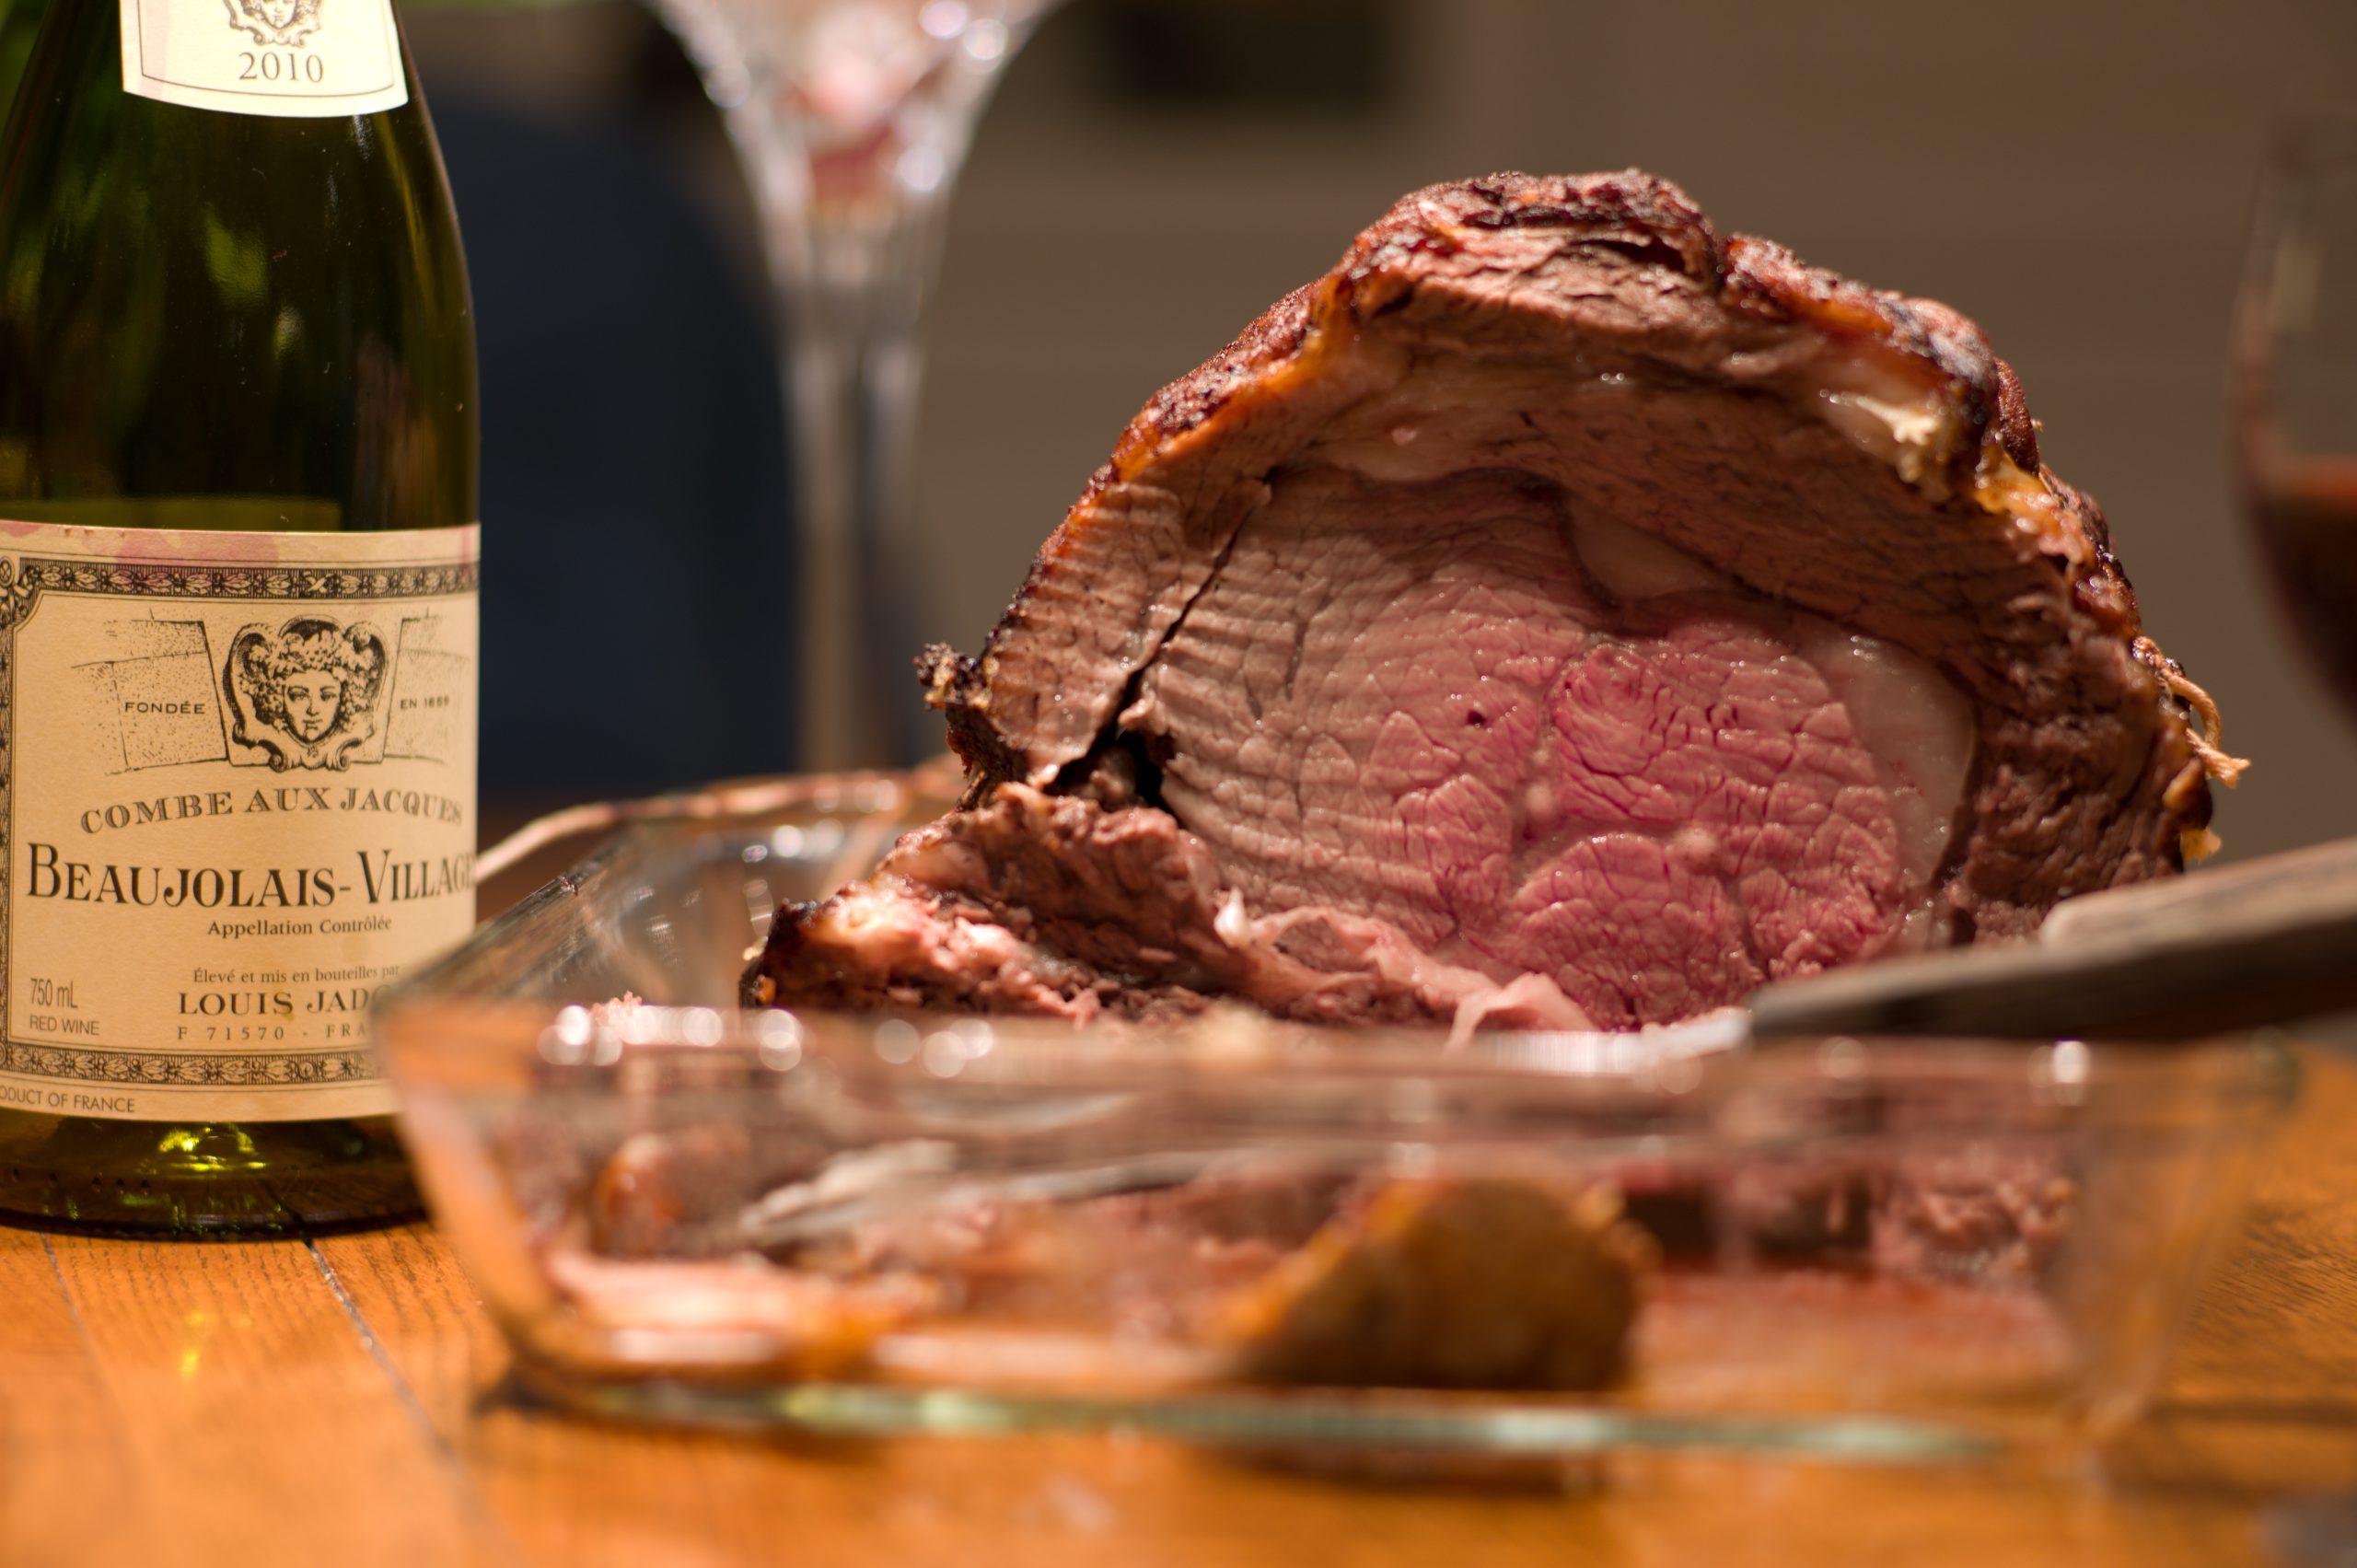 Content, Drink, Food, Image type, Meat, Roast Beef, Thing, Wine